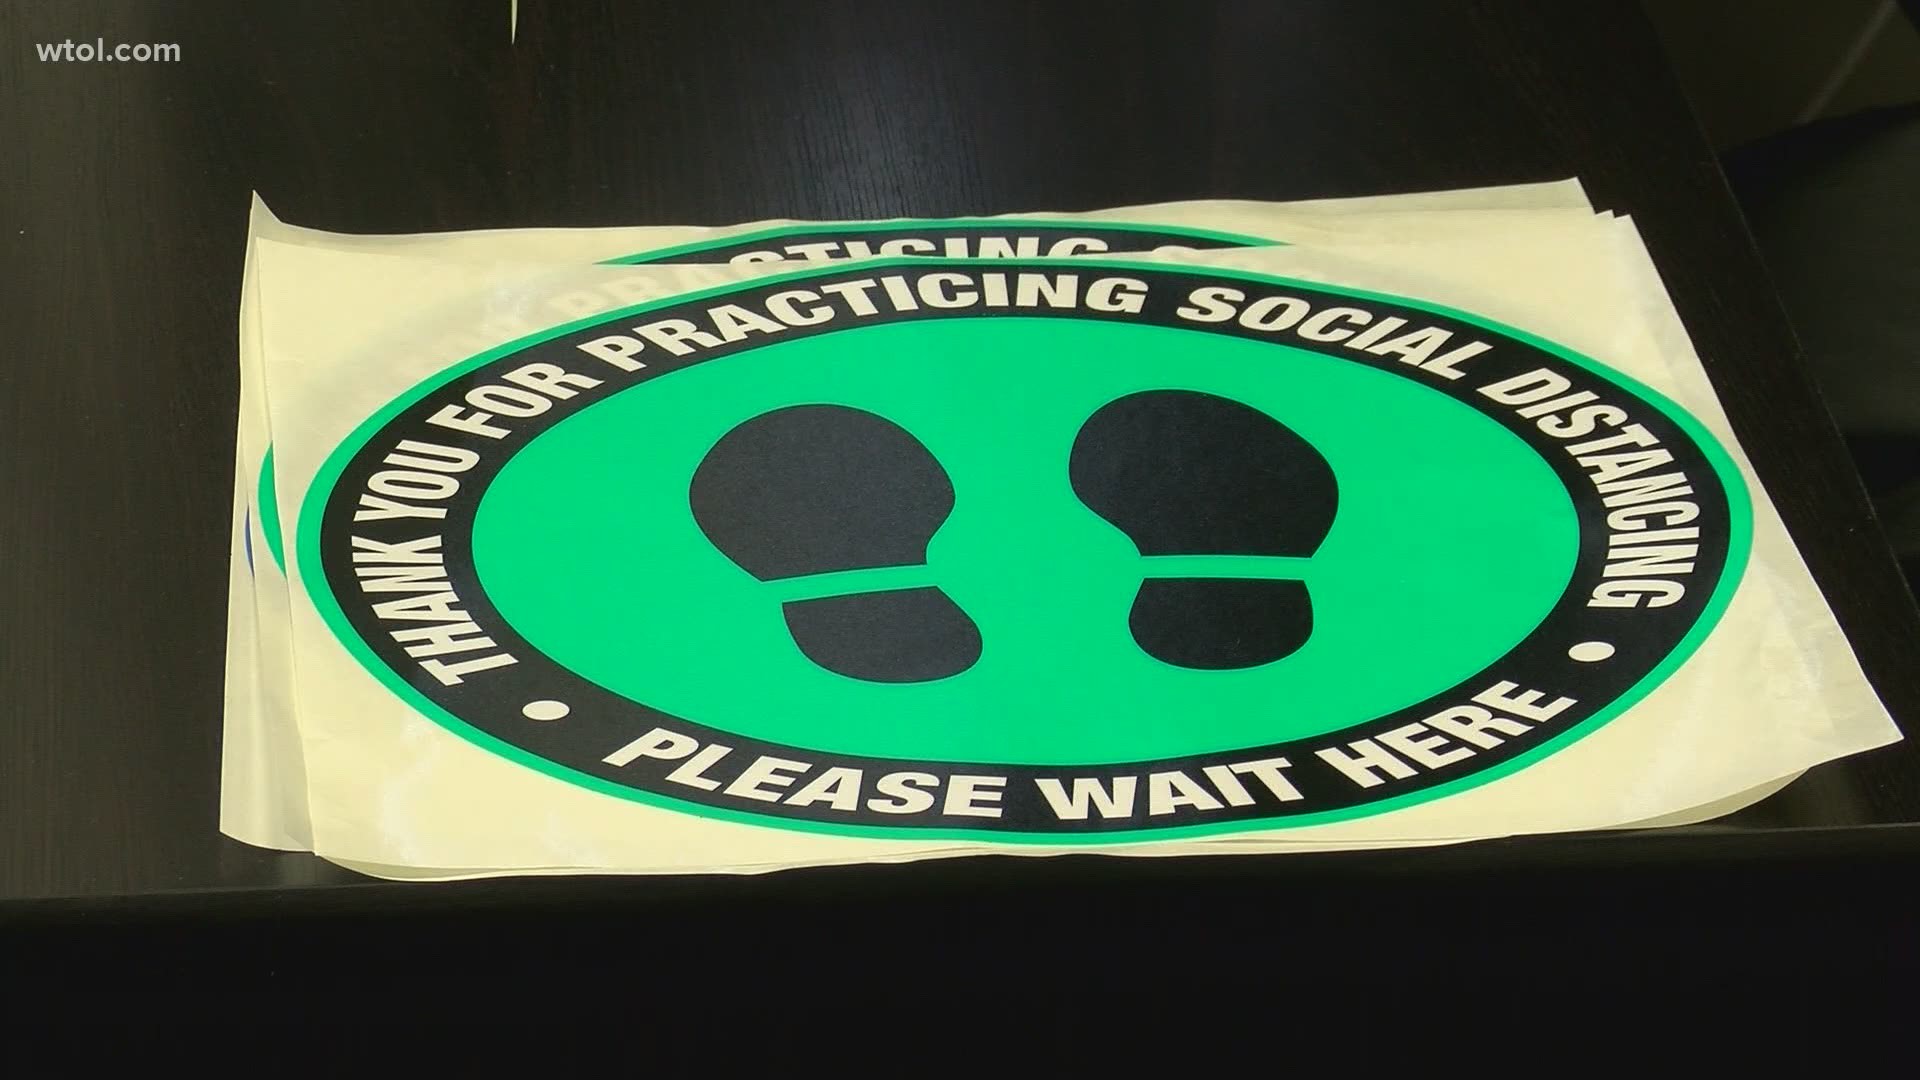 Social distancing has been made easier by floor markers and other types of labels made by Grace Imaging in Perrysburg.